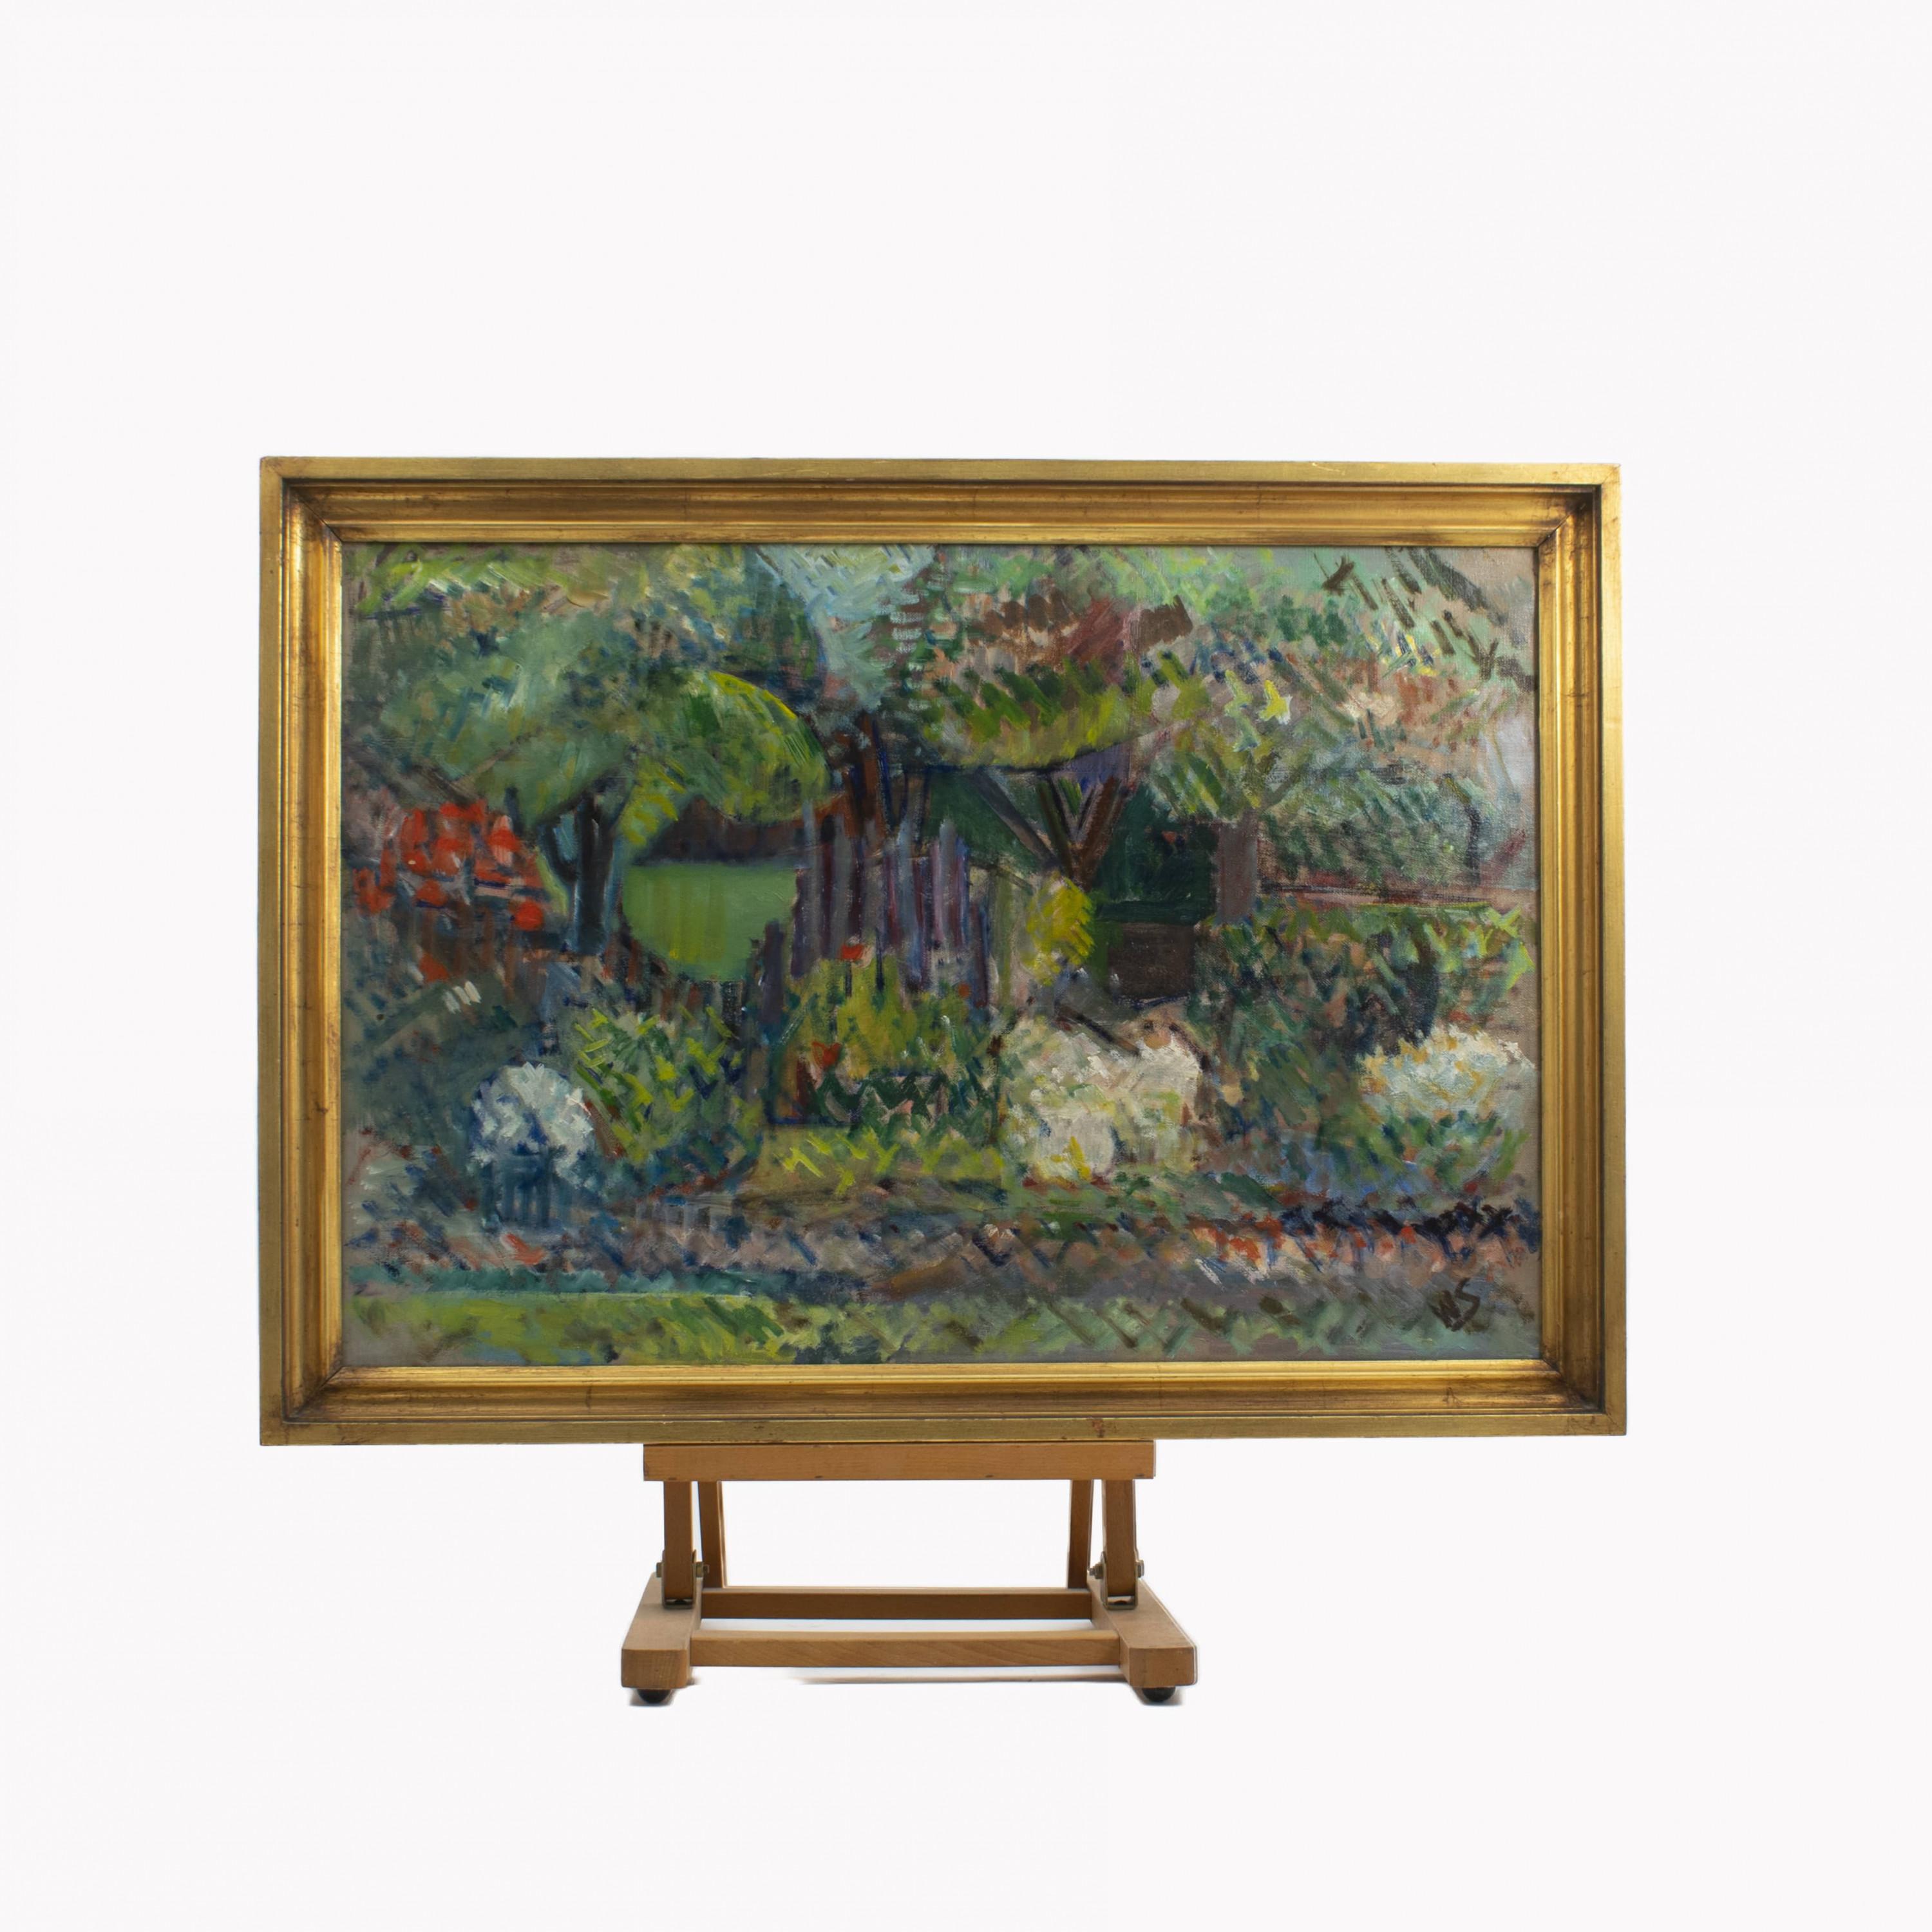 William Scharff 1886-1959.
Study of garden. Oil on canvas. c. 1912.
Signed W.S.
dimensions with out frame: 44 x 52.

Niels William Scharff was a Danish painter who was one of the leading forces in the breakthrough of Cubism in Denmark.